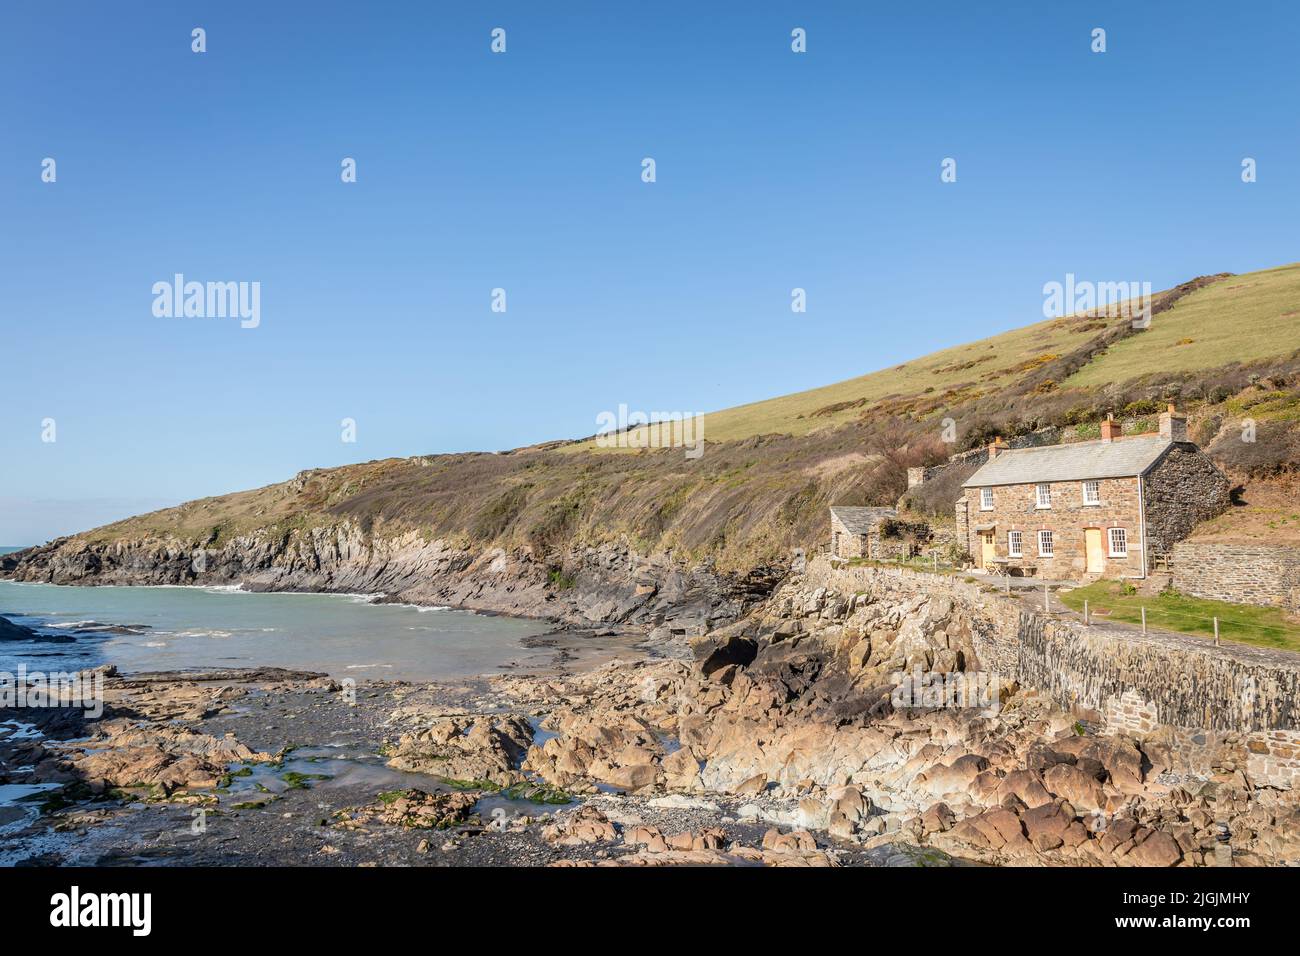 View of cliffs at Port Quin, Cornwall, England, UK Stock Photo